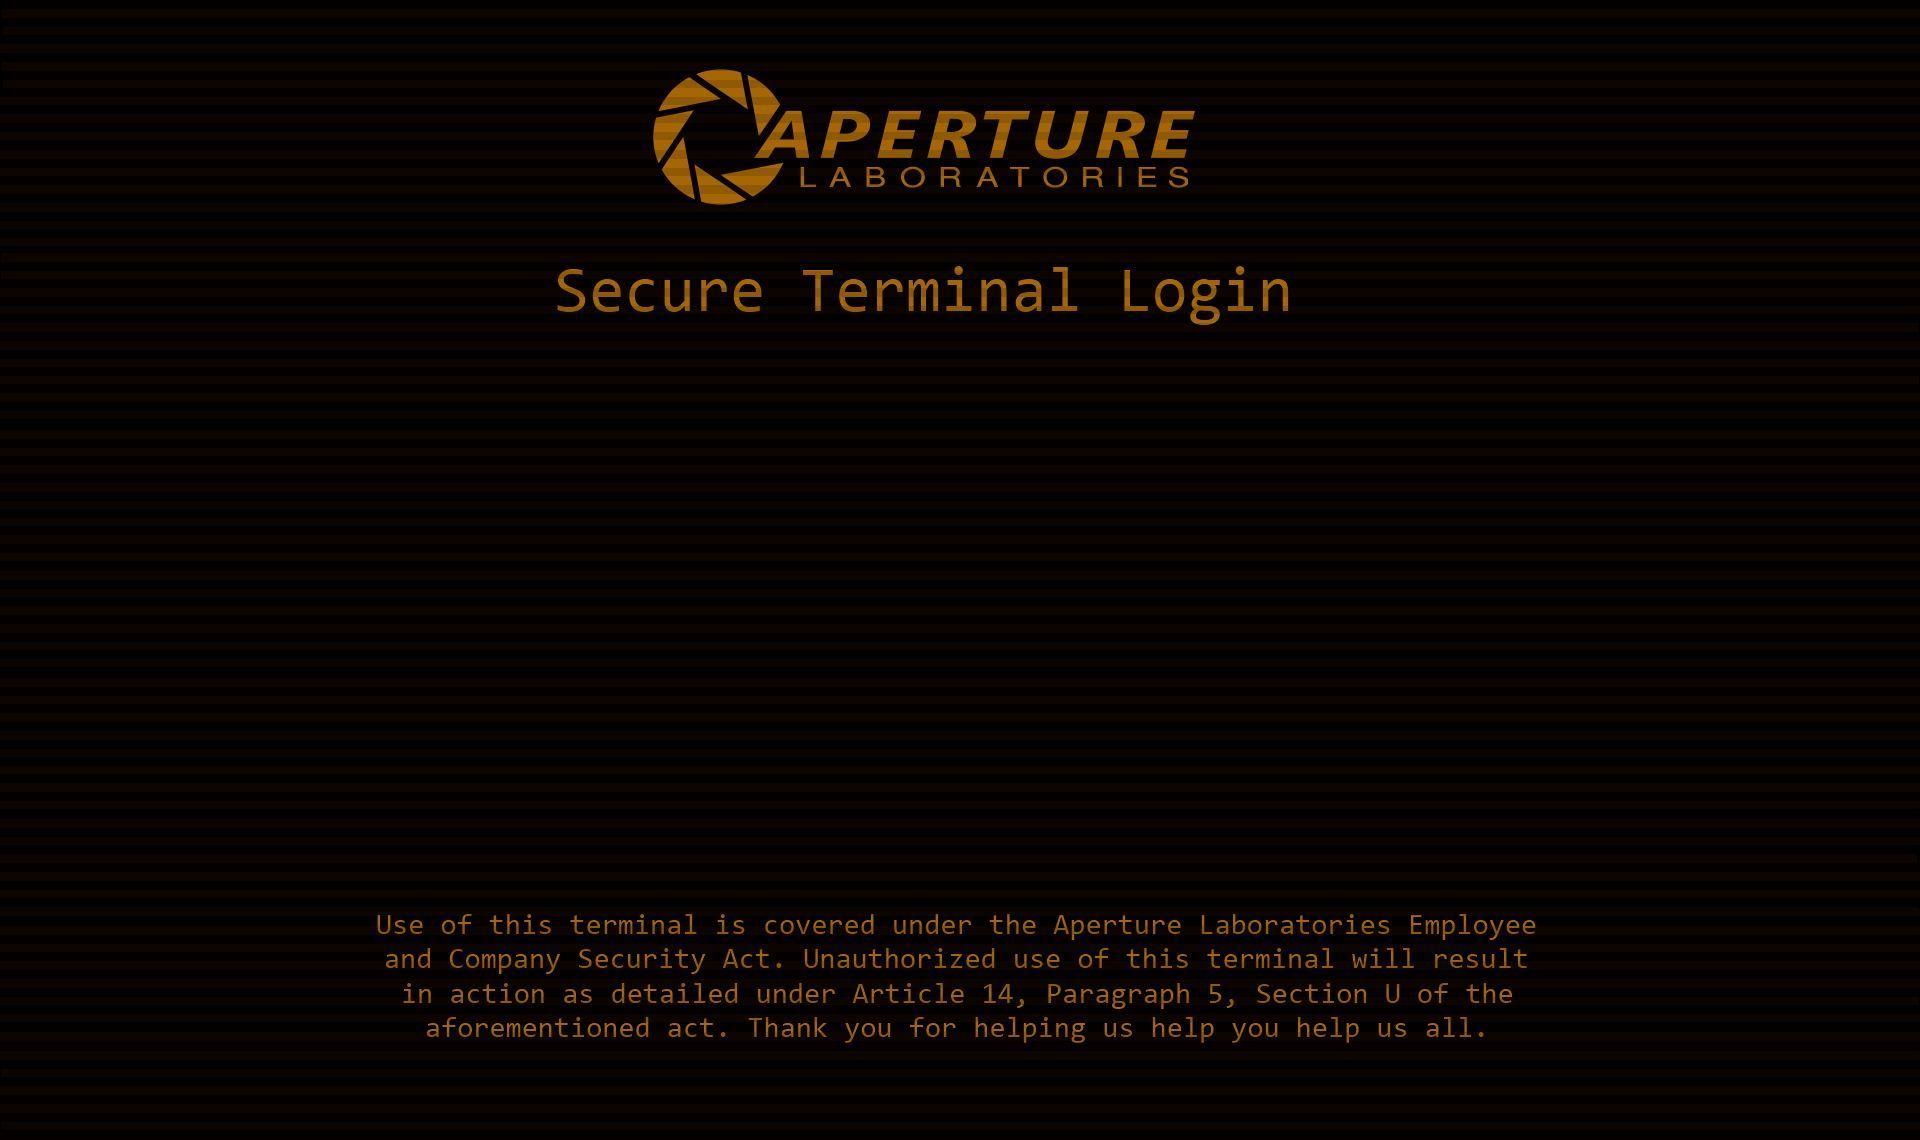 Aperture Science login screen from the videogame Portal(2007)